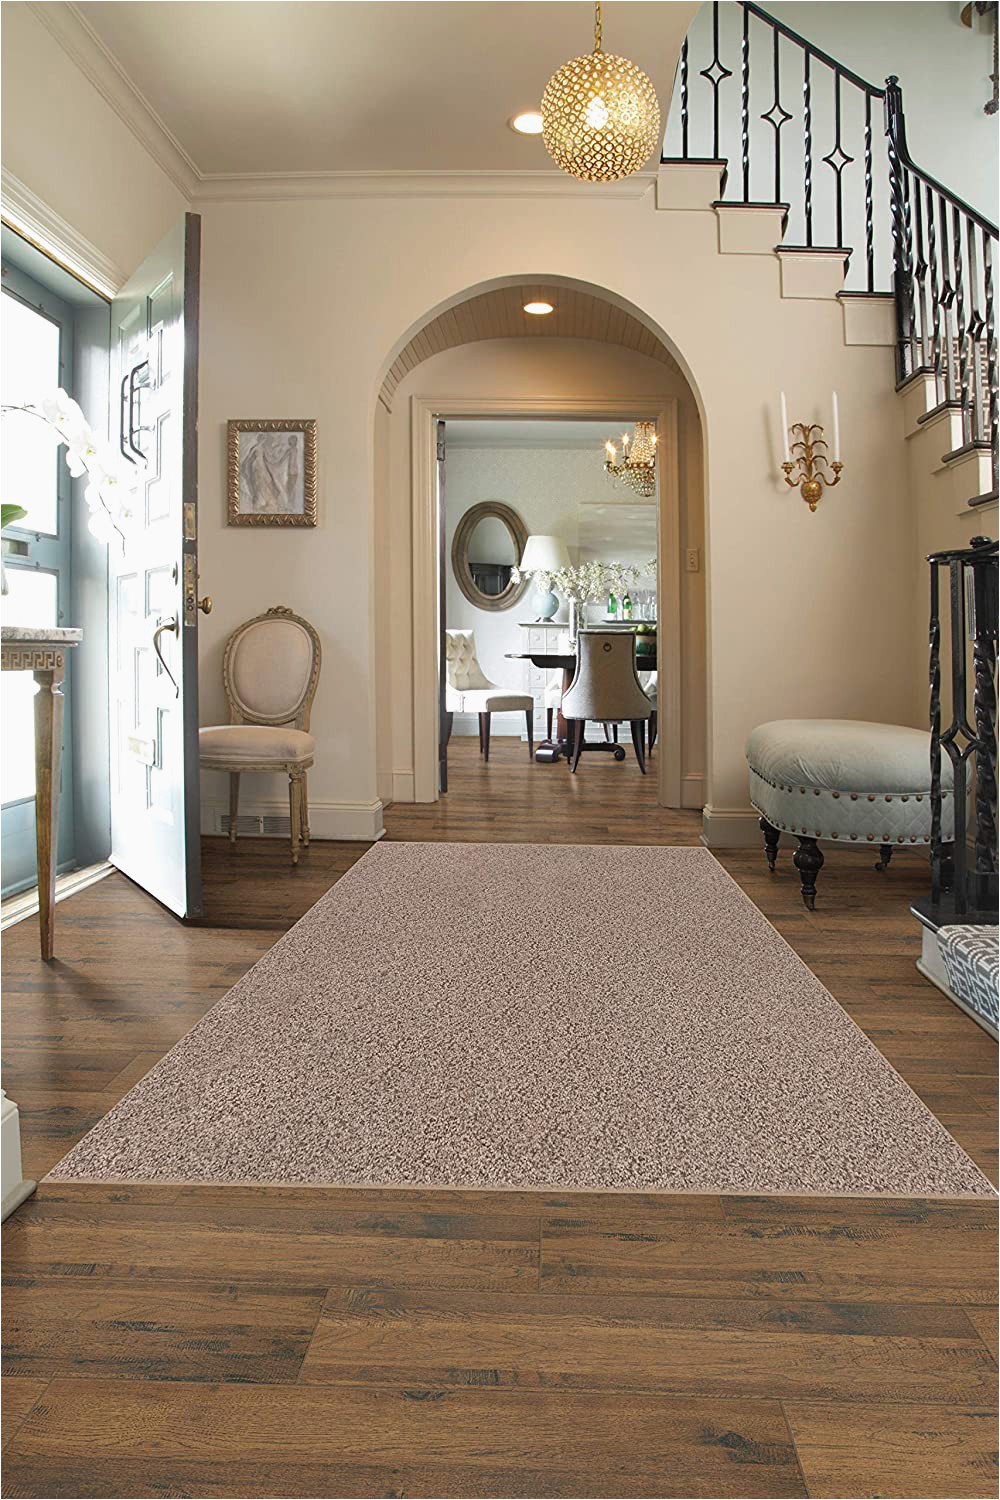 10 Foot by 12 Foot area Rugs Square 12 X12 Indoor area Rug Oyster Bay 32oz Plush Textured Carpet for Residential or Mercial Use with Premium Bound Polyester Edges